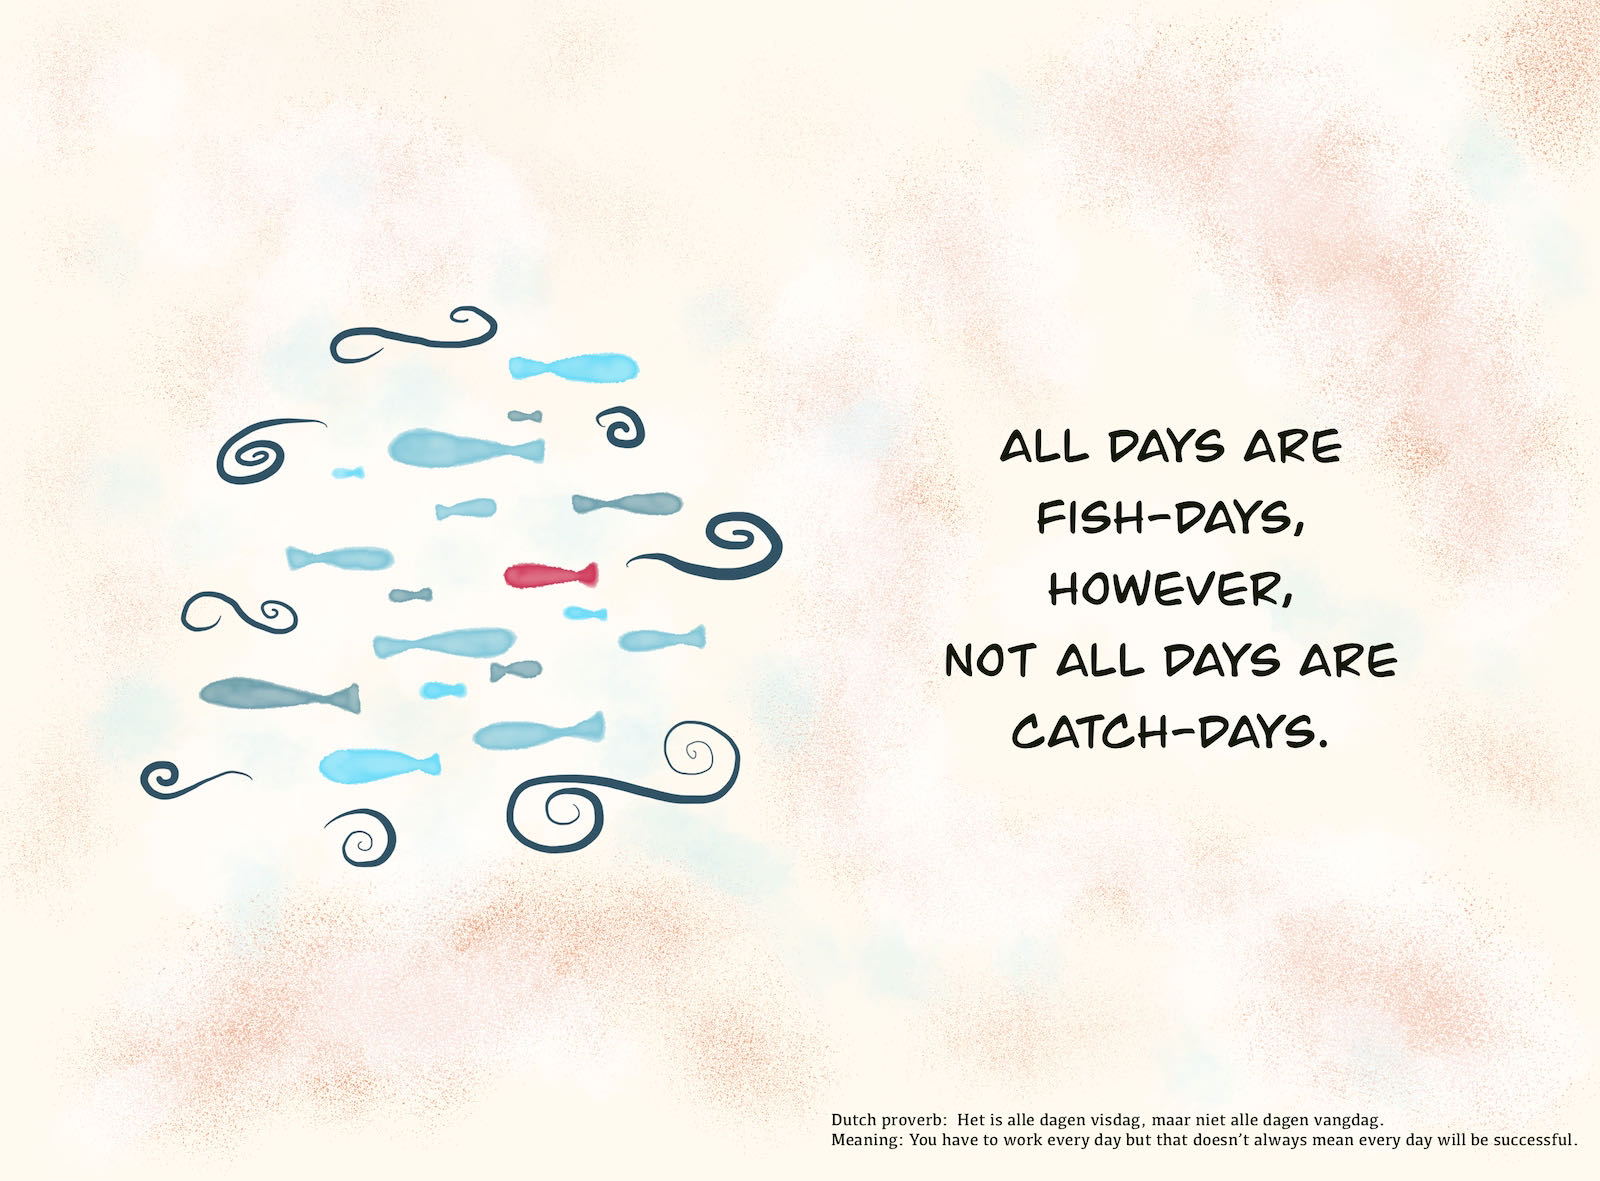 Not all days are fish-days…